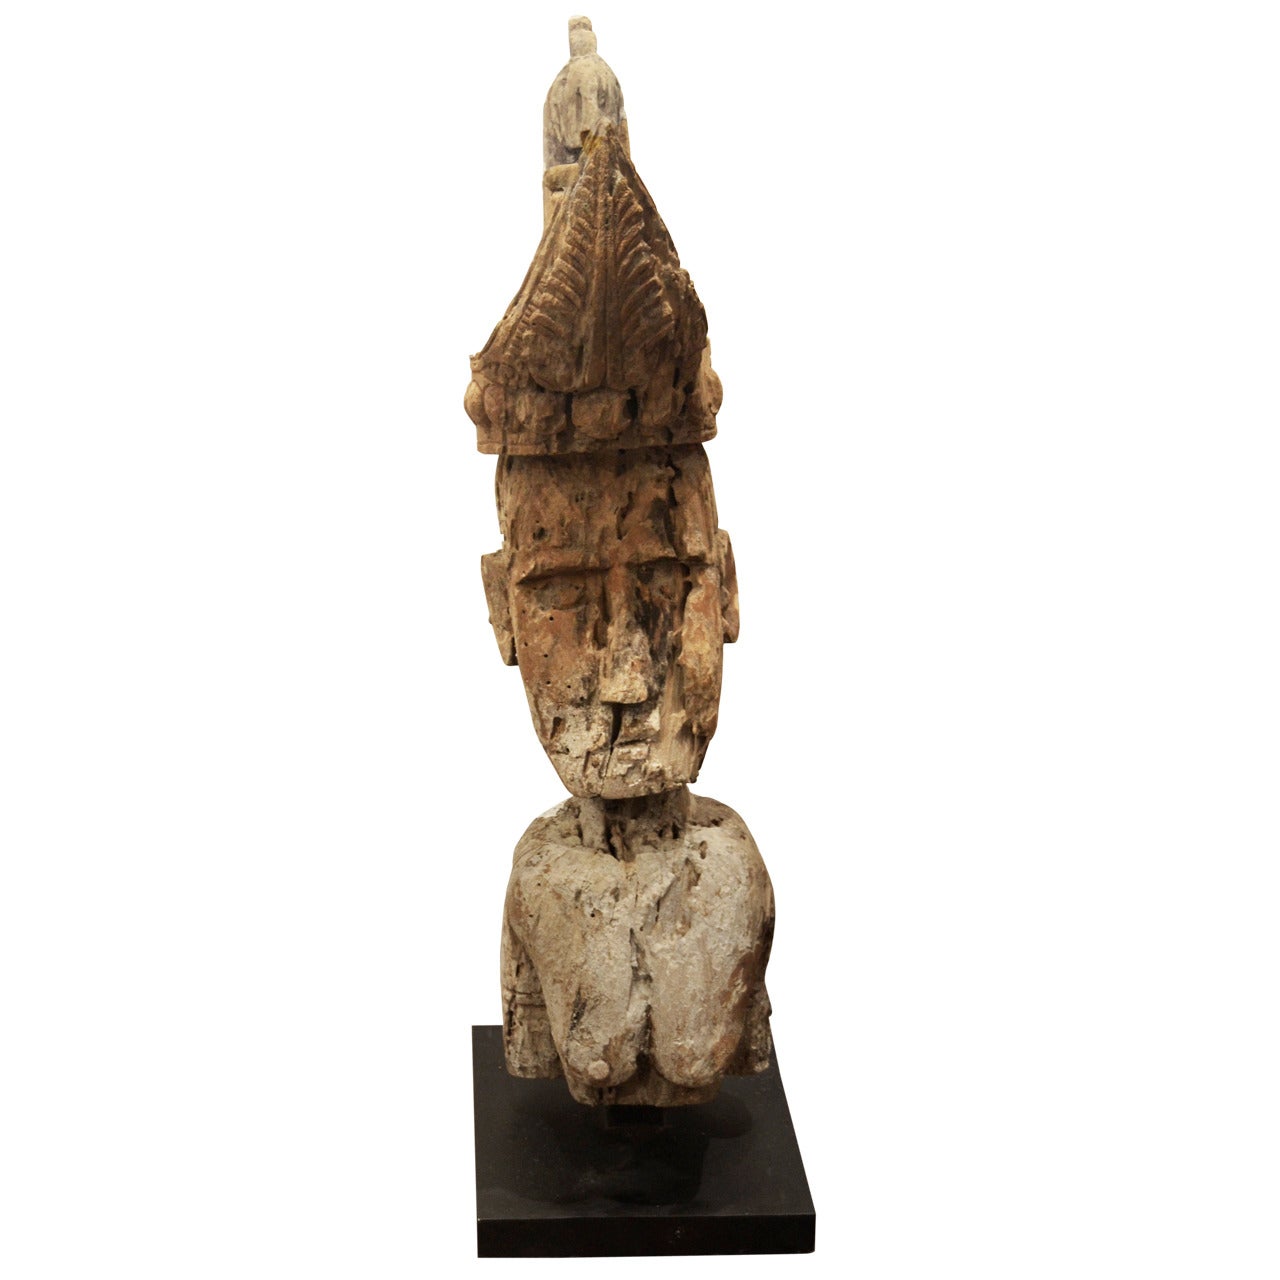 Primitive Sculpture on Stand from Sumatra